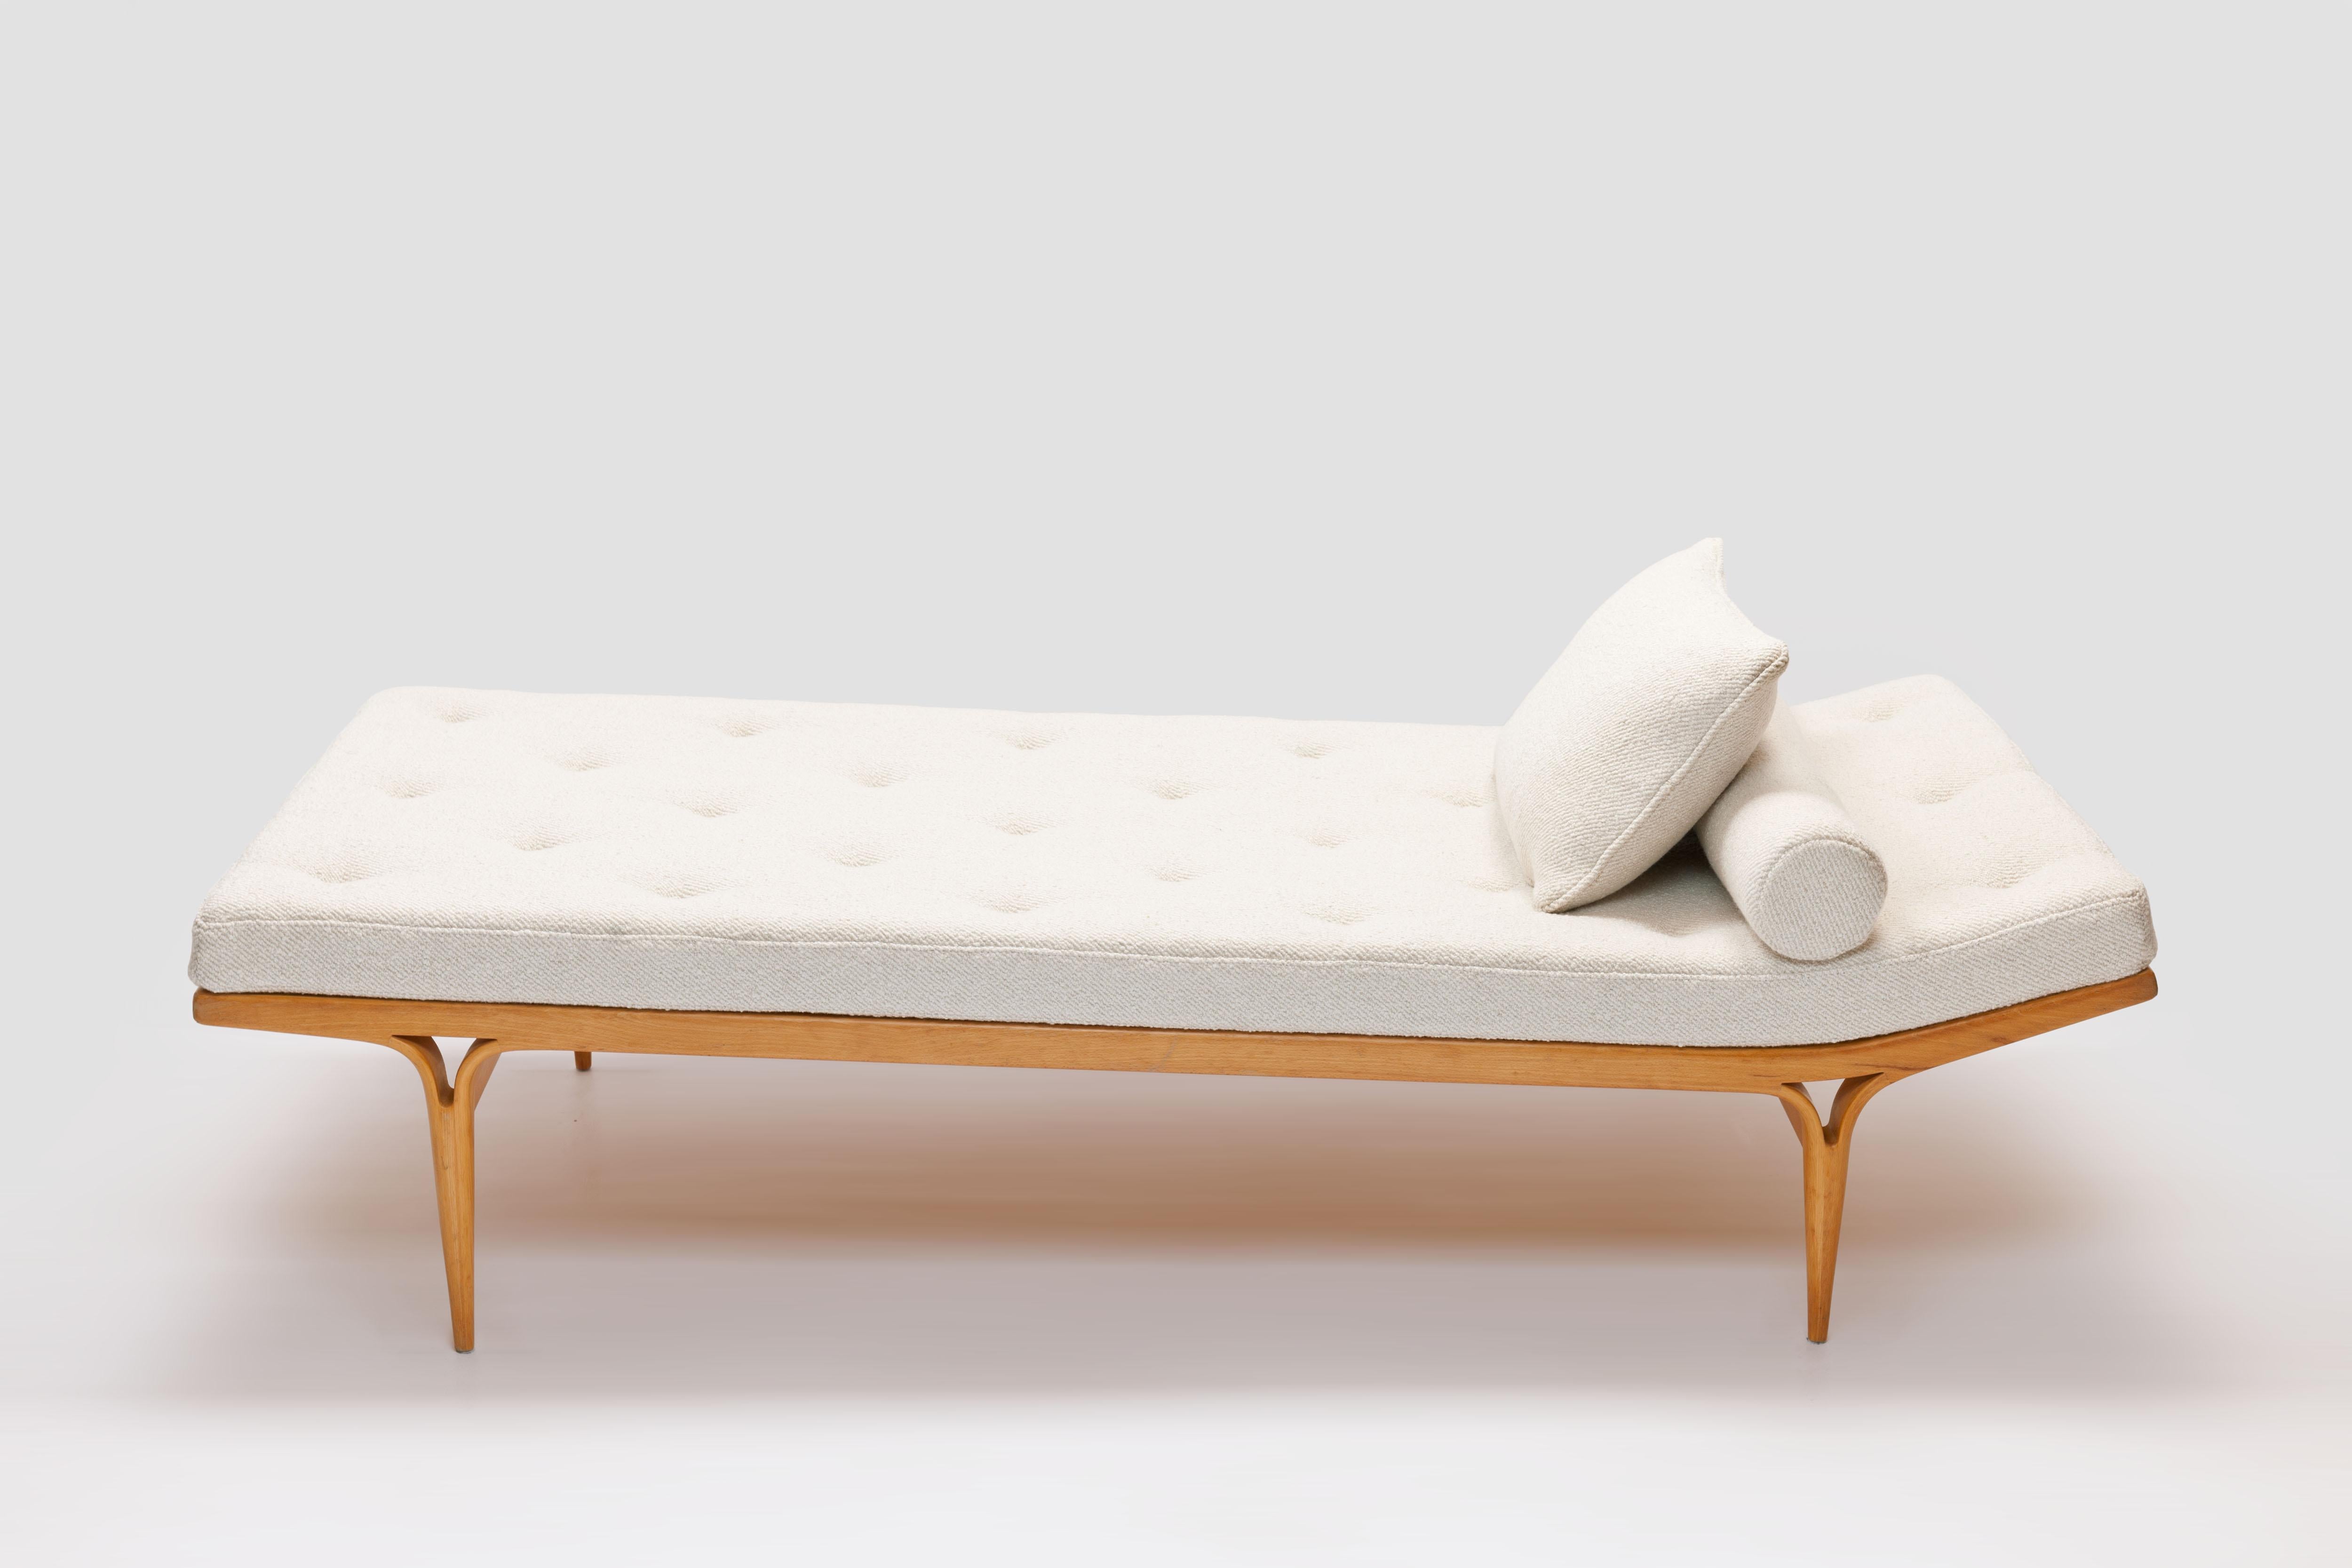 Birch and beech plywood daybed model T303 also known as the 'Berlin' daybed since it was first presented at the International Building Exhibition in Berlin in 1957. Designed by Swedish designer Bruno Mathsson for Karl Mathsson, Sweden.
The daybed is